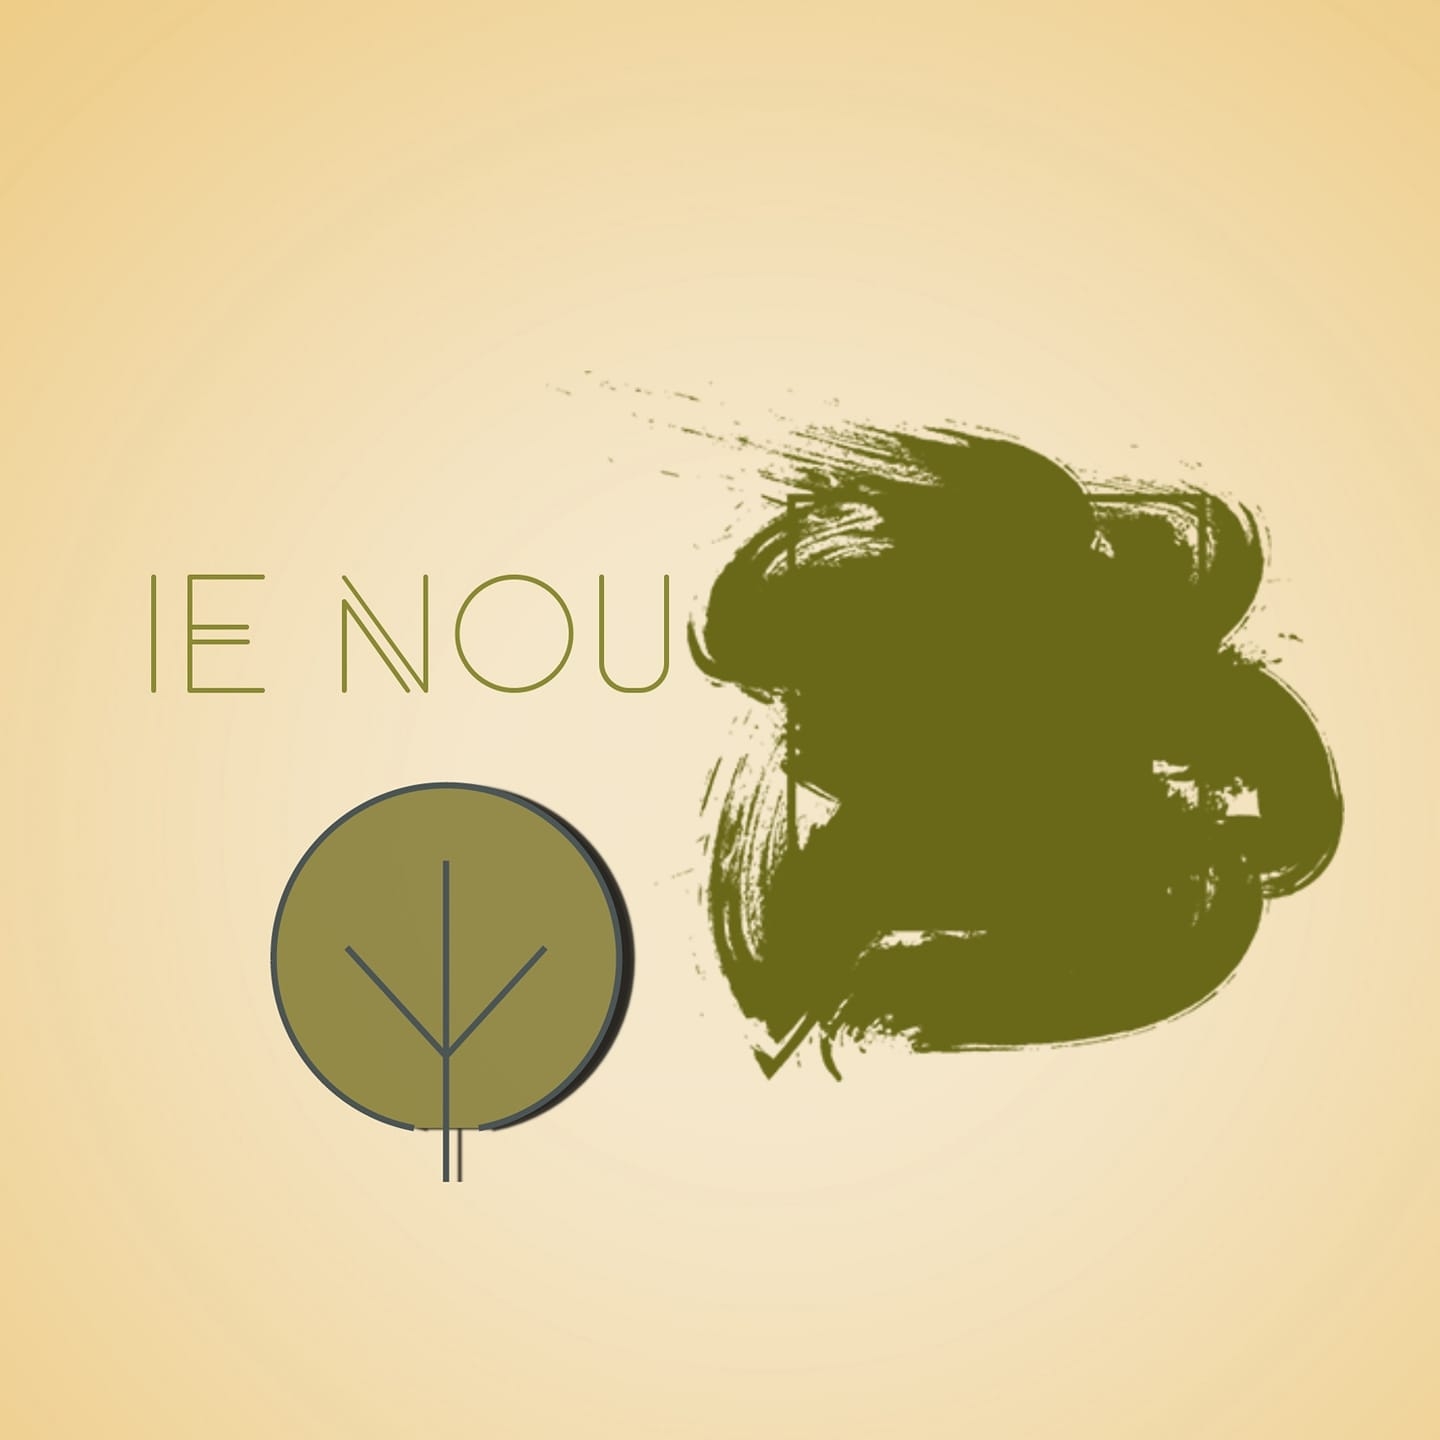 #ieNou. A new hub for the young artists of Craiova, set up by themselves